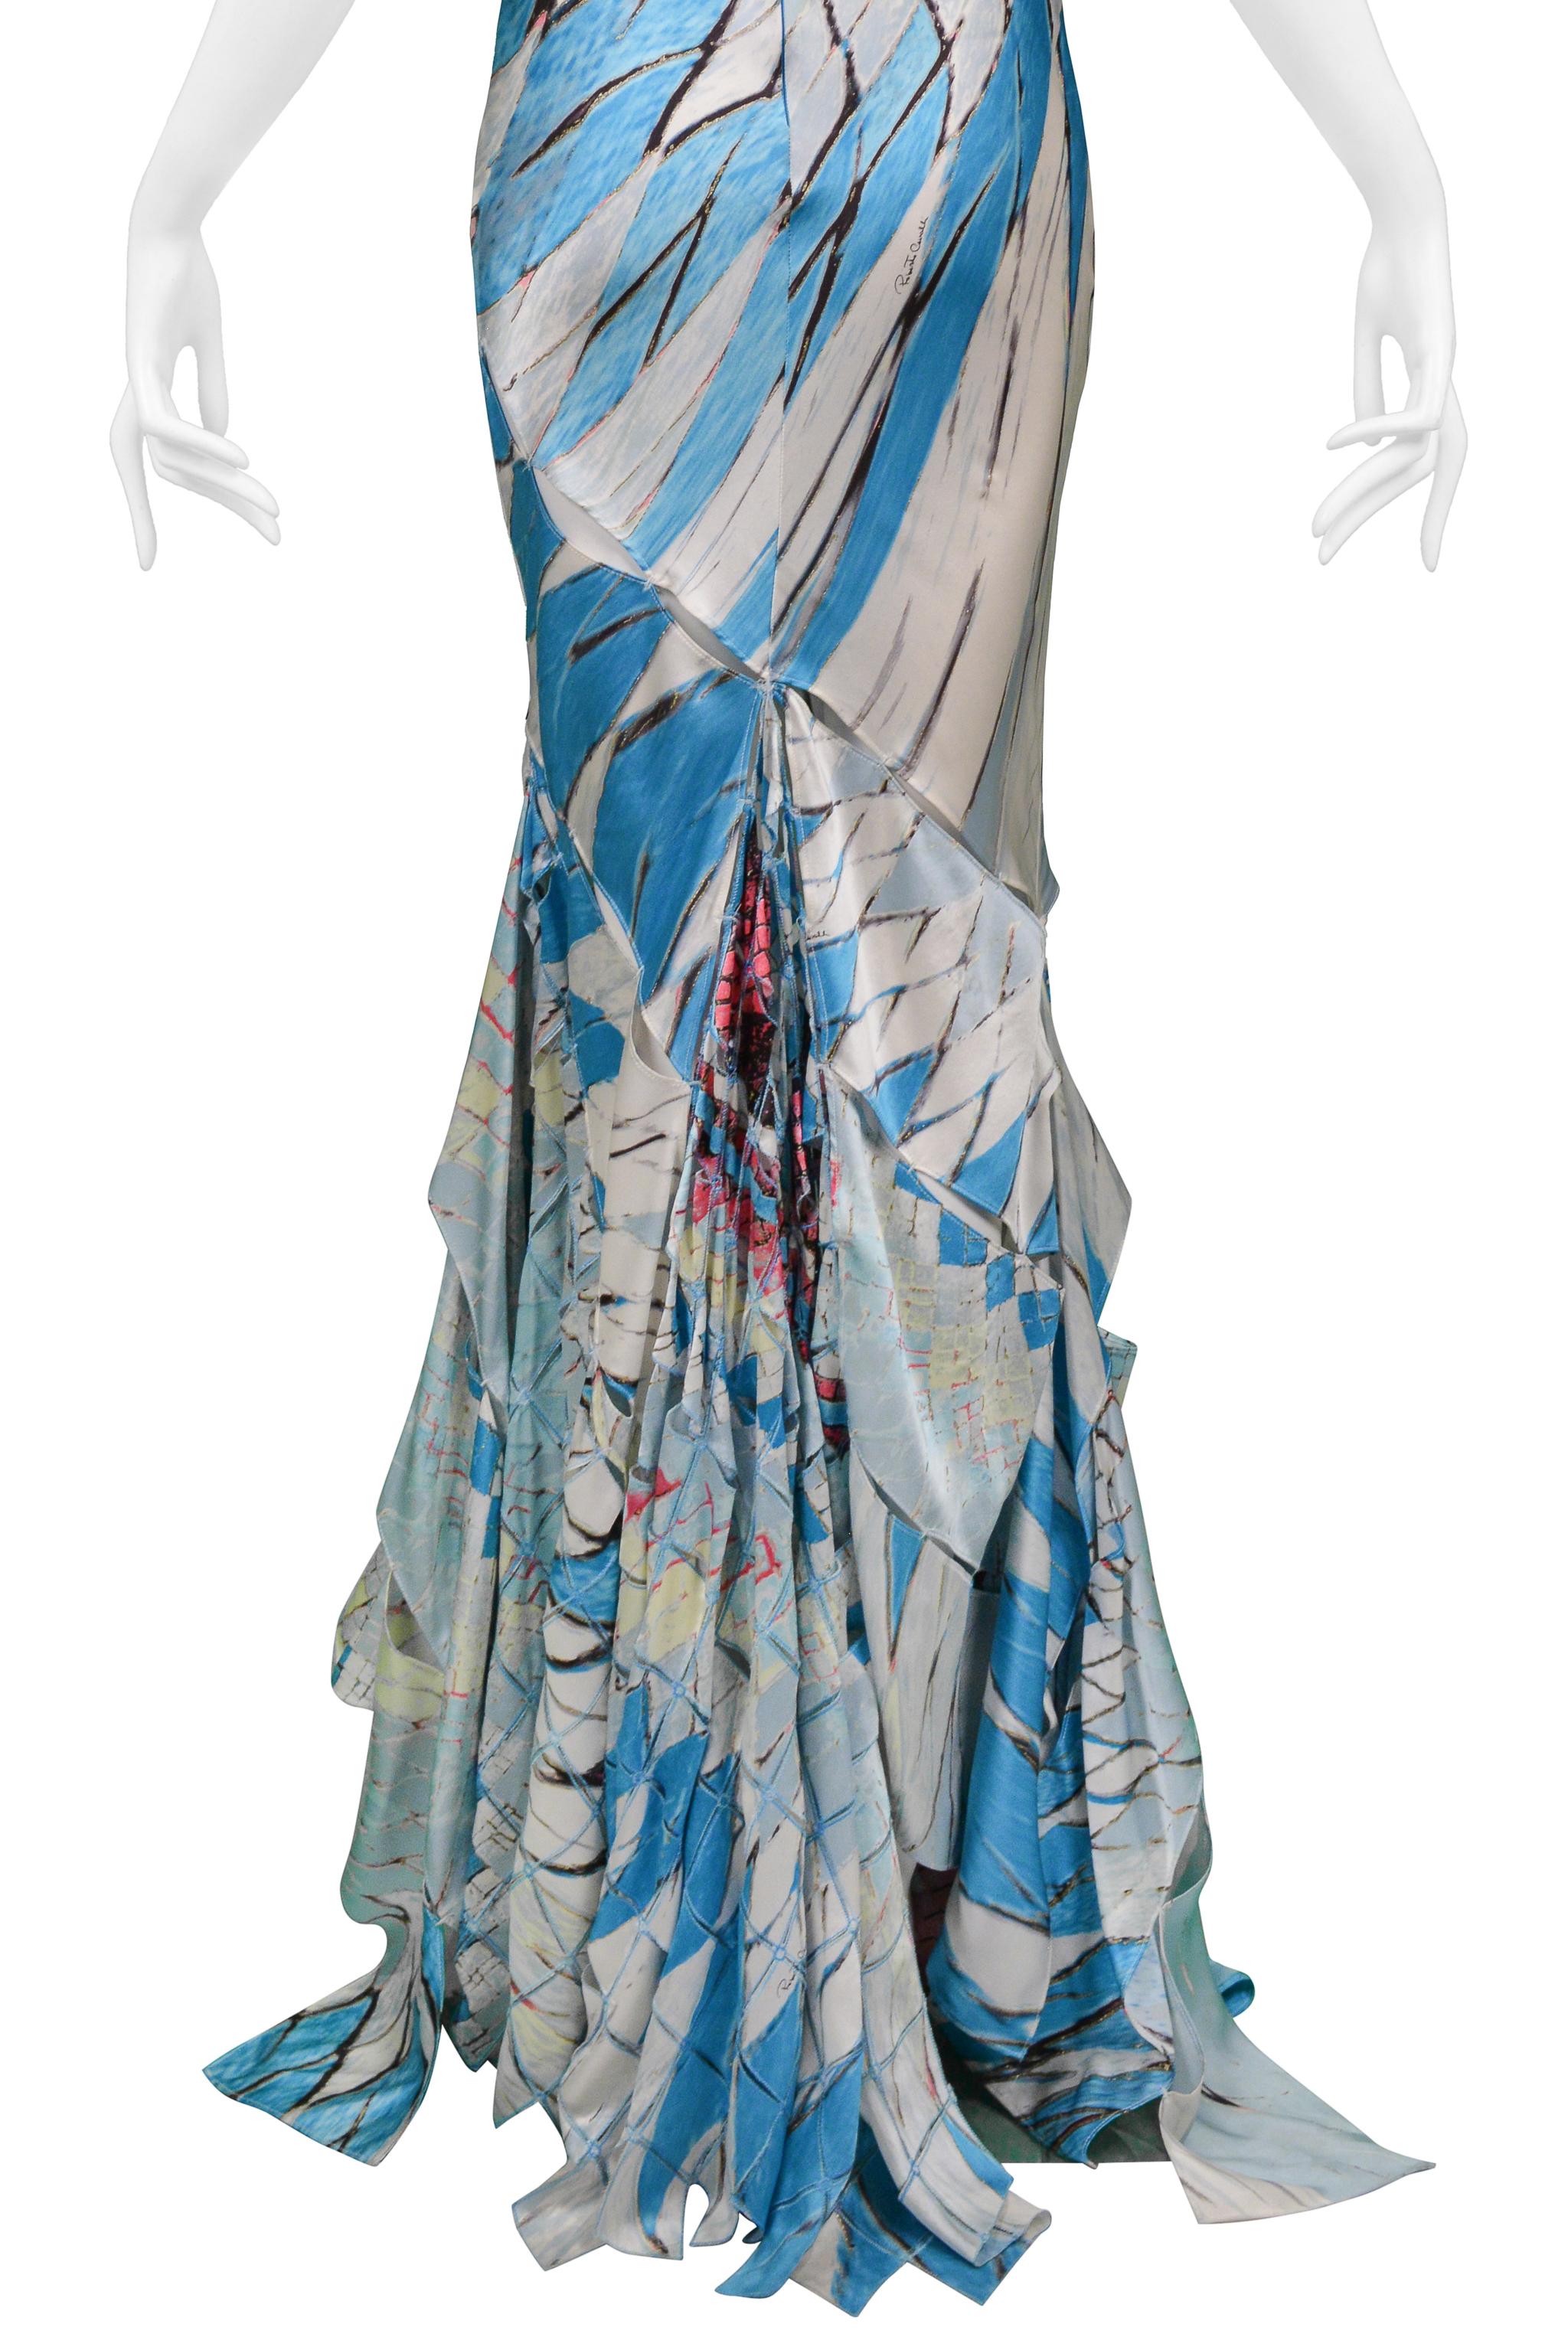 Roberto Cavalli Multicolor Stained Glass Print Gown With Cutout Slashes 2004 For Sale 4